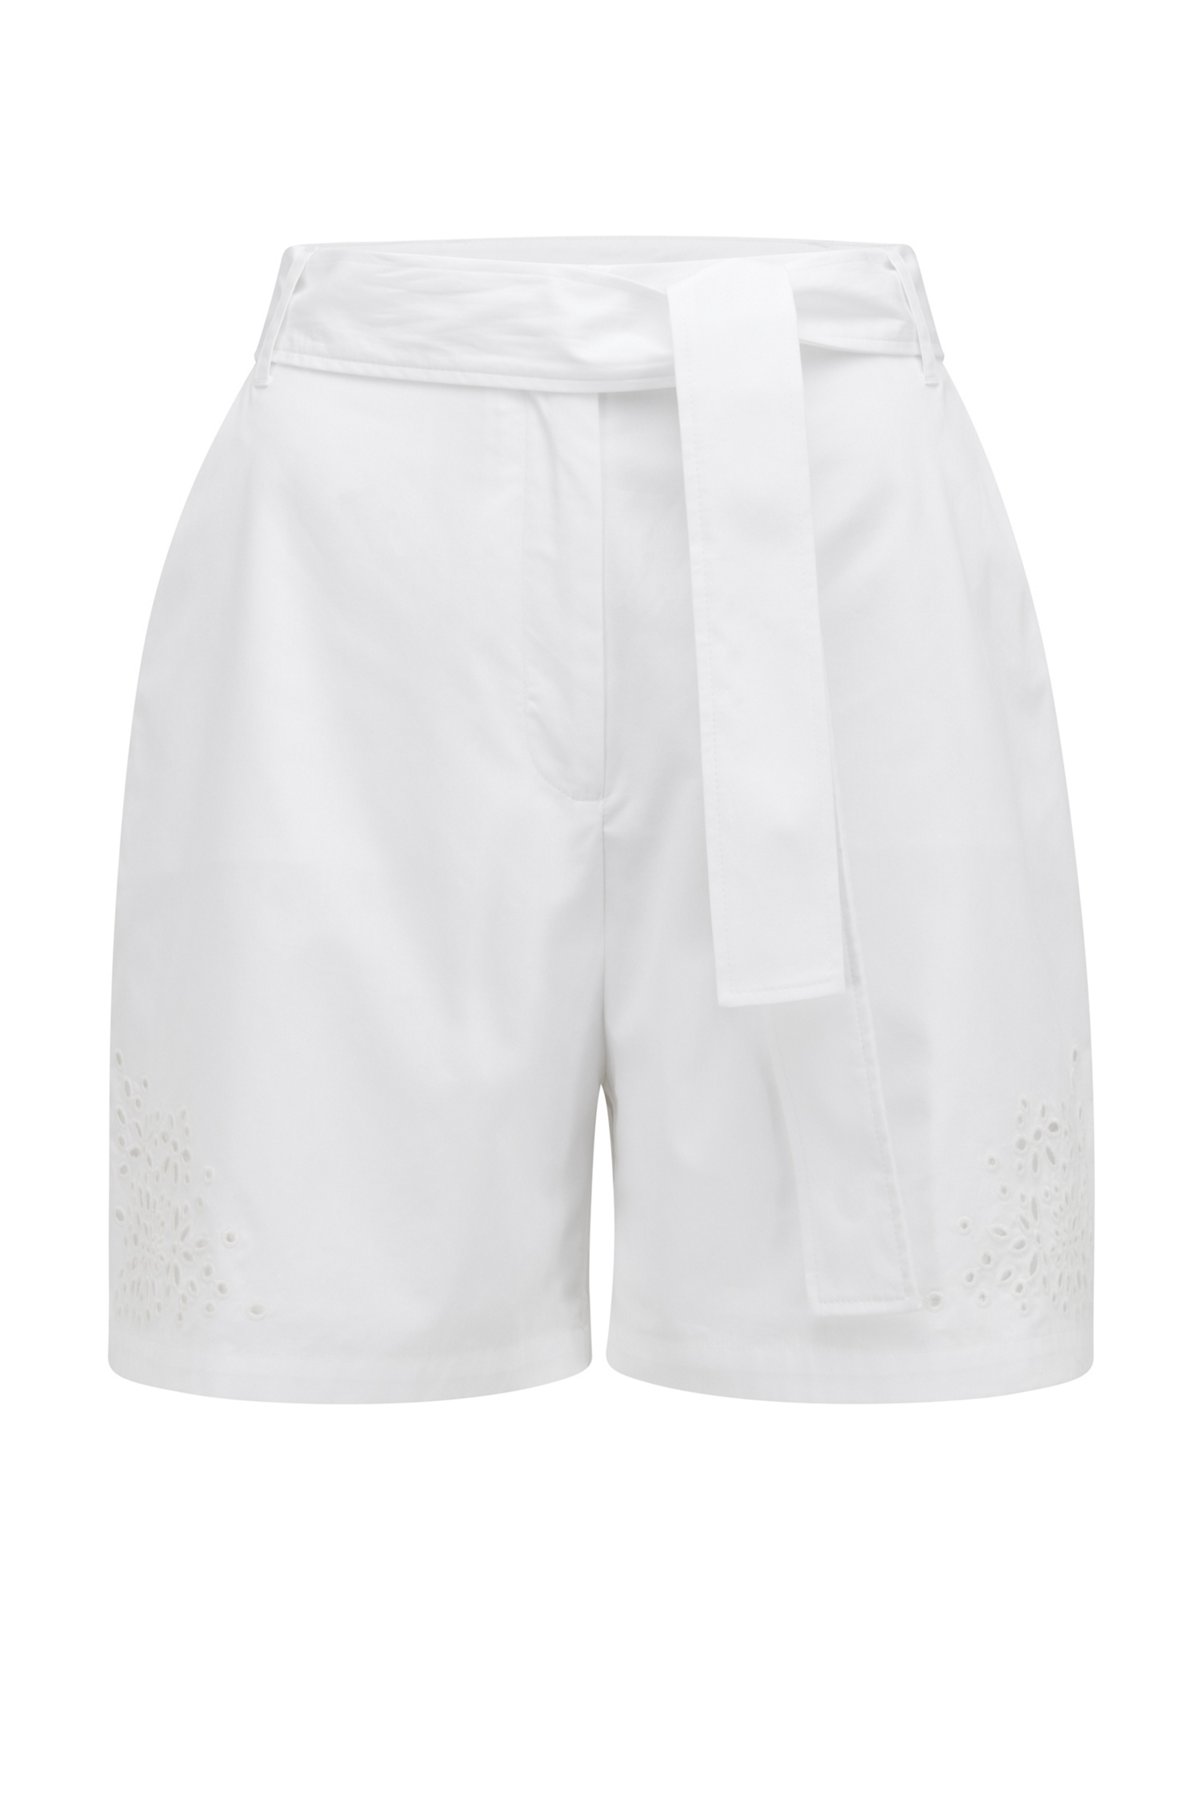 uregelmæssig Susteen forhold BOSS - Belted shorts in cotton with broderie anglaise